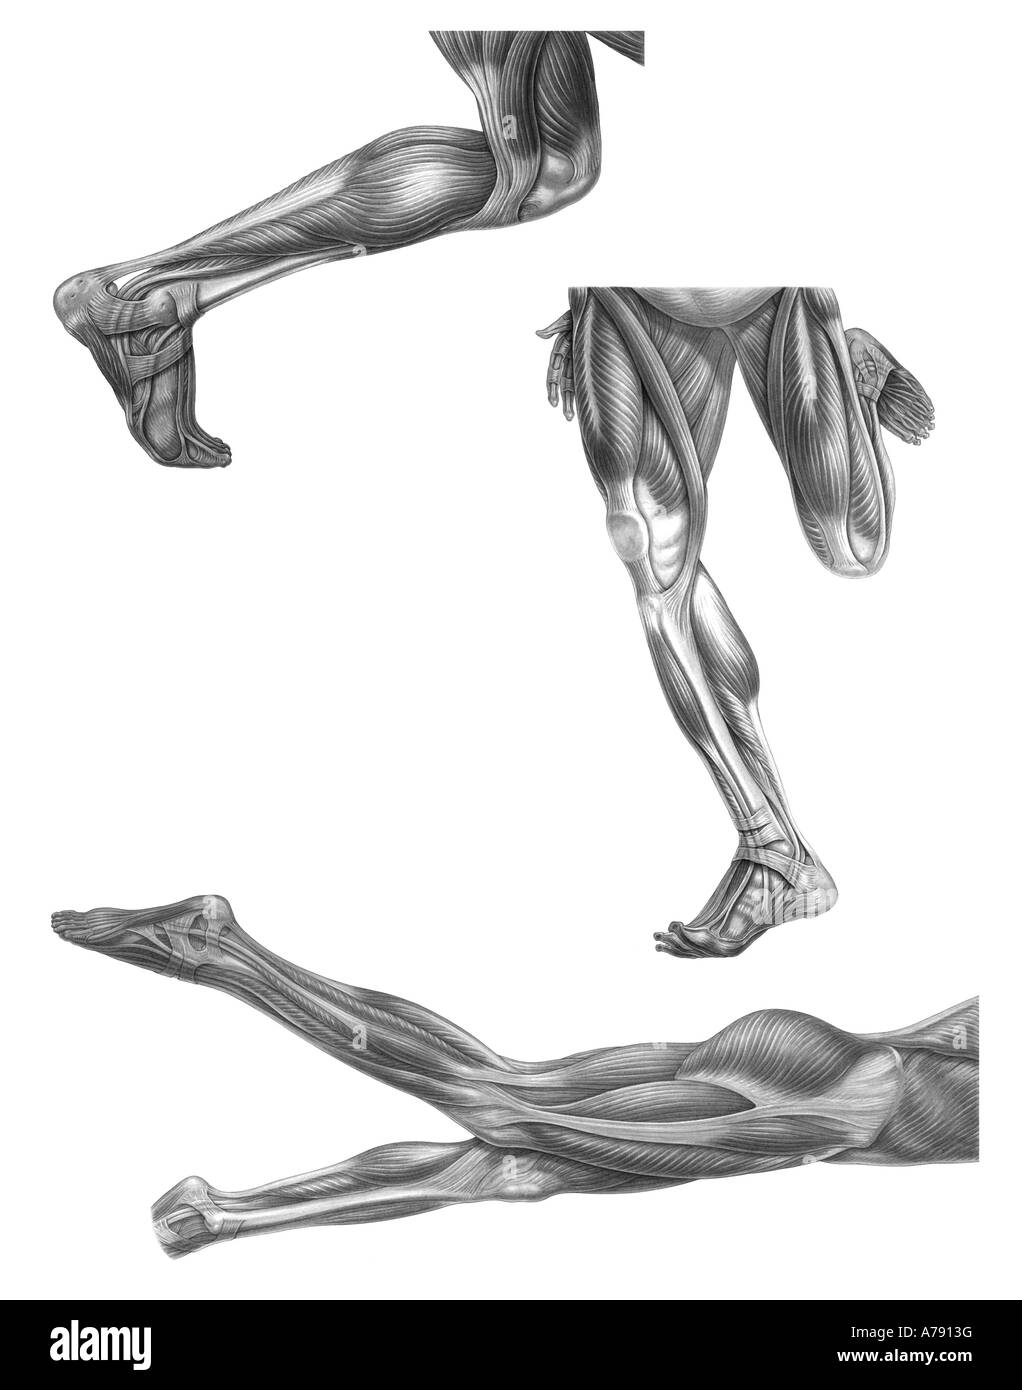 An illustration of the human leg musculature used when running and swimming. Stock Photo